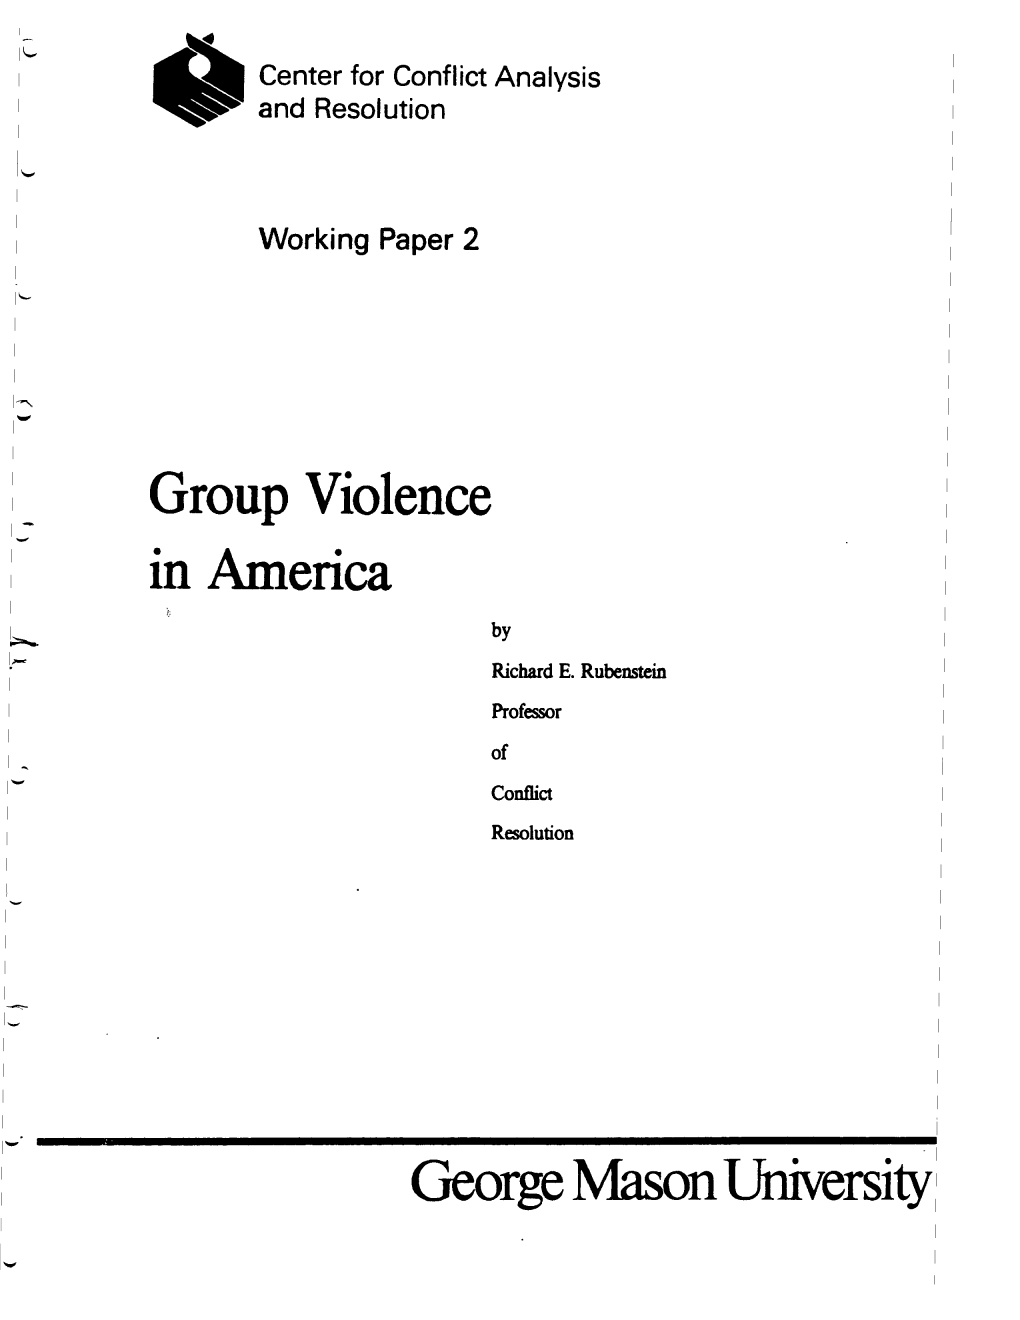 Group Violence in America 1 Consensus Scholarship and Historical Amnesia 1 Violence and Progress 5 the Structure of Particularized Rebellion 8